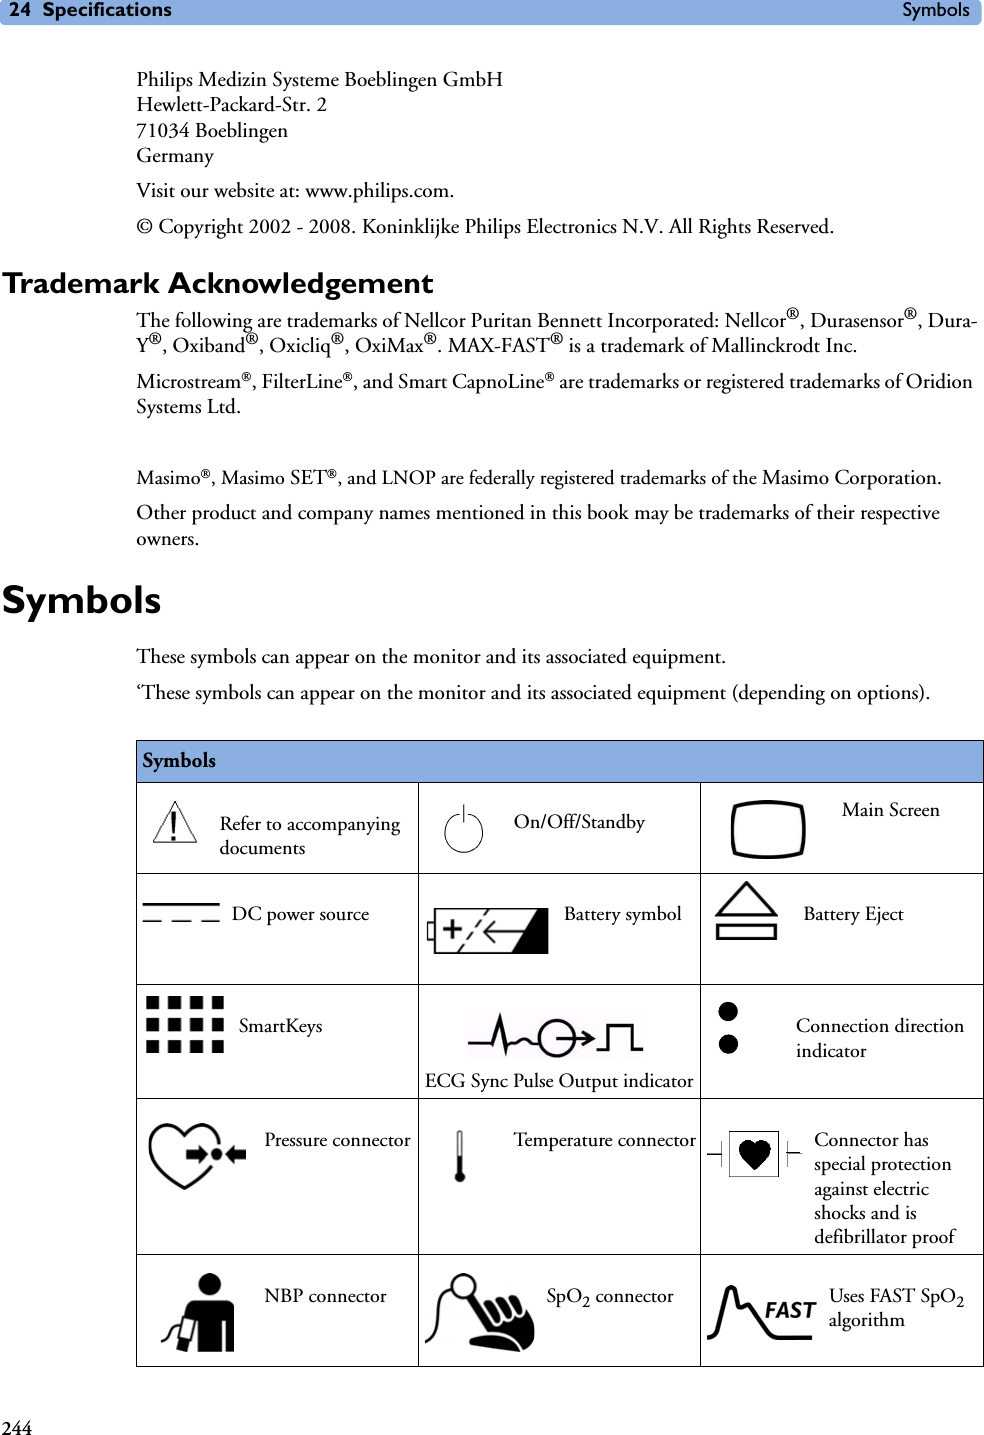 24 Specifications Symbols244Philips Medizin Systeme Boeblingen GmbHHewlett-Packard-Str. 271034 BoeblingenGermanyVisit our website at: www.philips.com.© Copyright 2002 - 2008. Koninklijke Philips Electronics N.V. All Rights Reserved.Trademark AcknowledgementThe following are trademarks of Nellcor Puritan Bennett Incorporated: Nellcor®, Durasensor®, Dura-Y®, Oxiband®, Oxicliq®, OxiMax®. MAX-FAST® is a trademark of Mallinckrodt Inc.Microstream, FilterLine, and Smart CapnoLine are trademarks or registered trademarks of Oridion Systems Ltd.Masimo, Masimo SET, and LNOP are federally registered trademarks of the Masimo Corporation.Other product and company names mentioned in this book may be trademarks of their respective owners.SymbolsThese symbols can appear on the monitor and its associated equipment.‘These symbols can appear on the monitor and its associated equipment (depending on options).SymbolsRefer to accompanying documentsOn/Off/Standby Main ScreenDC power source Battery symbol Battery EjectSmartKeysECG Sync Pulse Output indicatorConnection direction indicatorPressure connector Temperature connector Connector has special protection against electric shocks and is defibrillator proofNBP connector SpO2 connector Uses FAST SpO2 algorithm